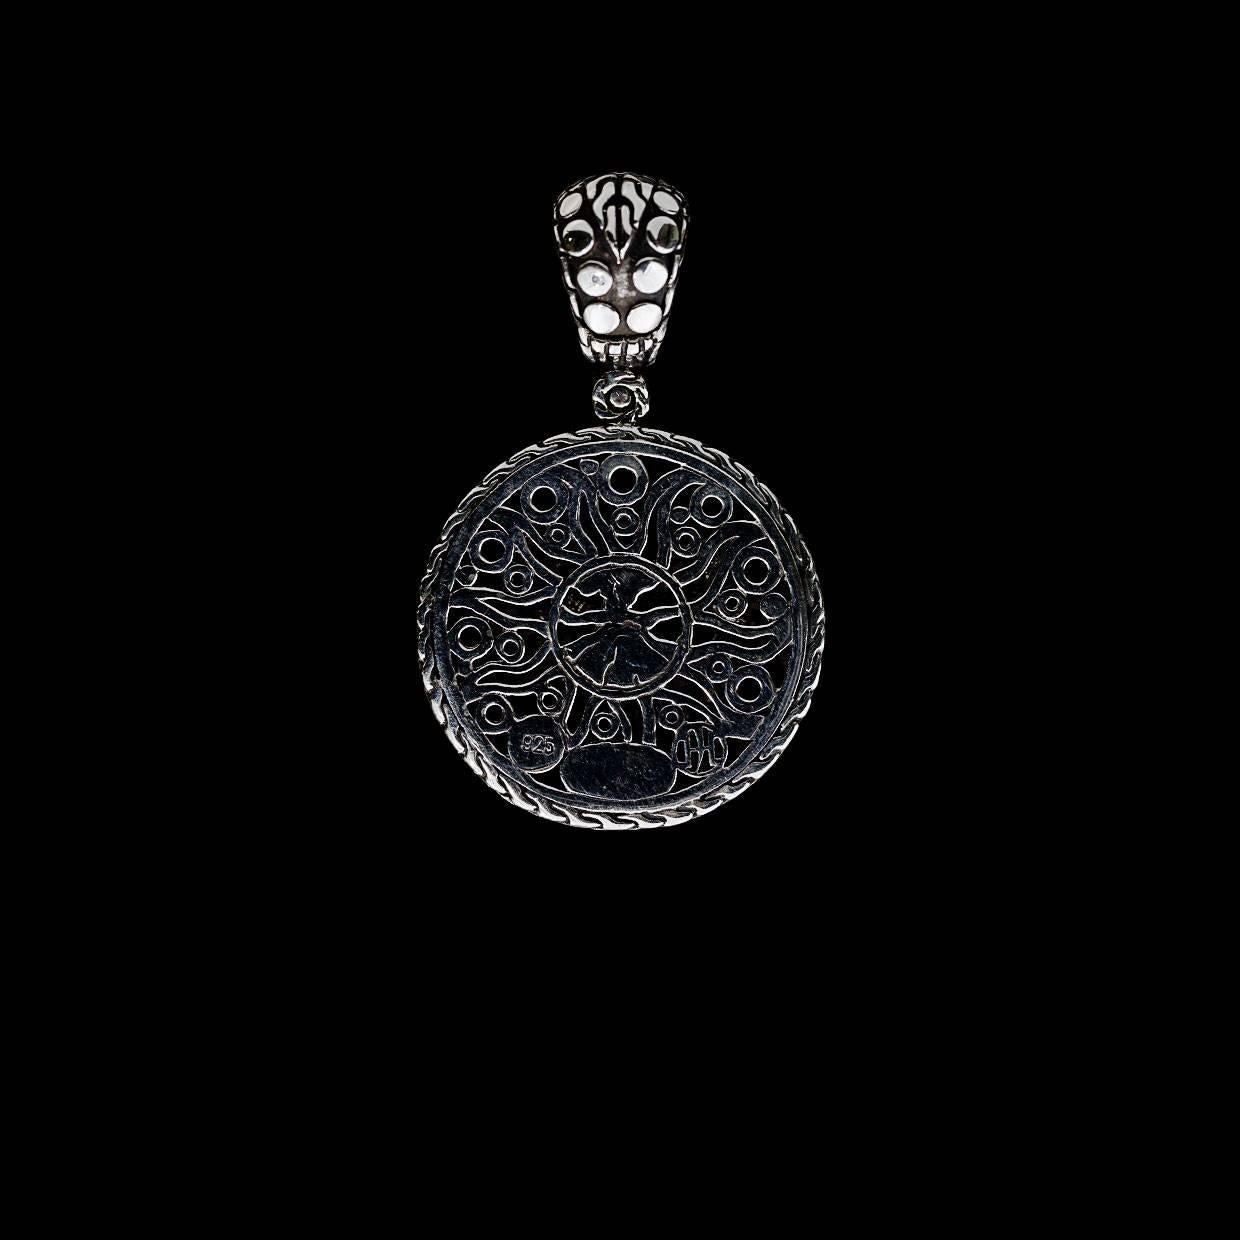 Each piece of John Hardy jewelry has been crafted in Bali since 1975. John Hardy is dedicated to creating timeless one-of-a-kind pieces that are brilliantly alive.

This sterling silver pendant is from John Hardy's Jaisalmer Dot collection. This